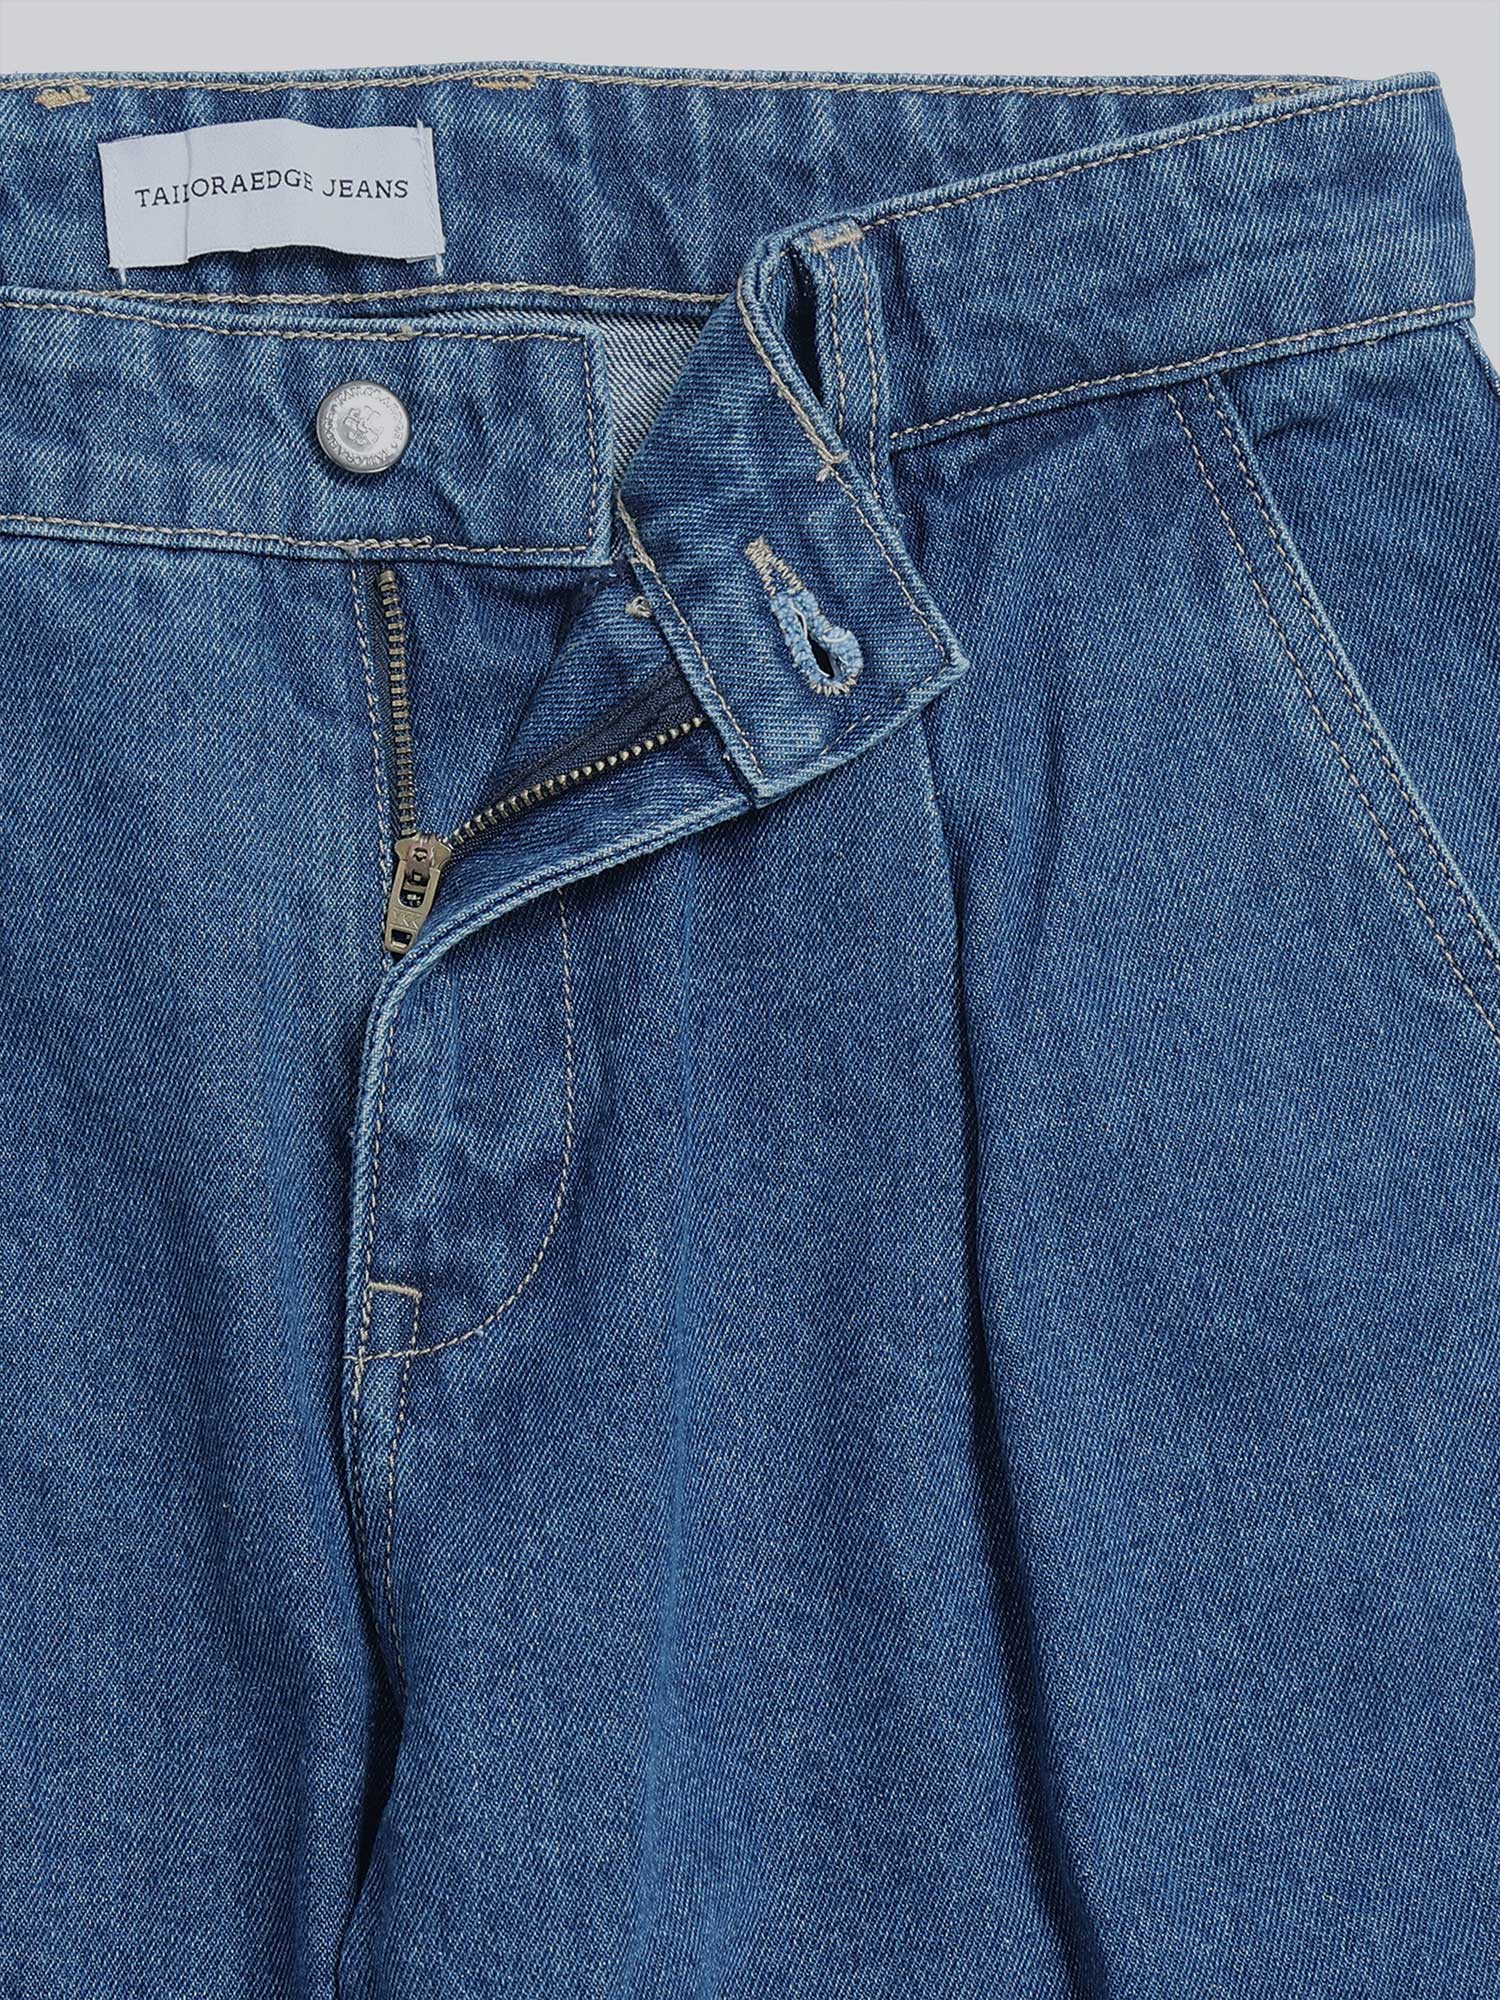 Classic Relaxed Mid Blue Double Cargo Denim